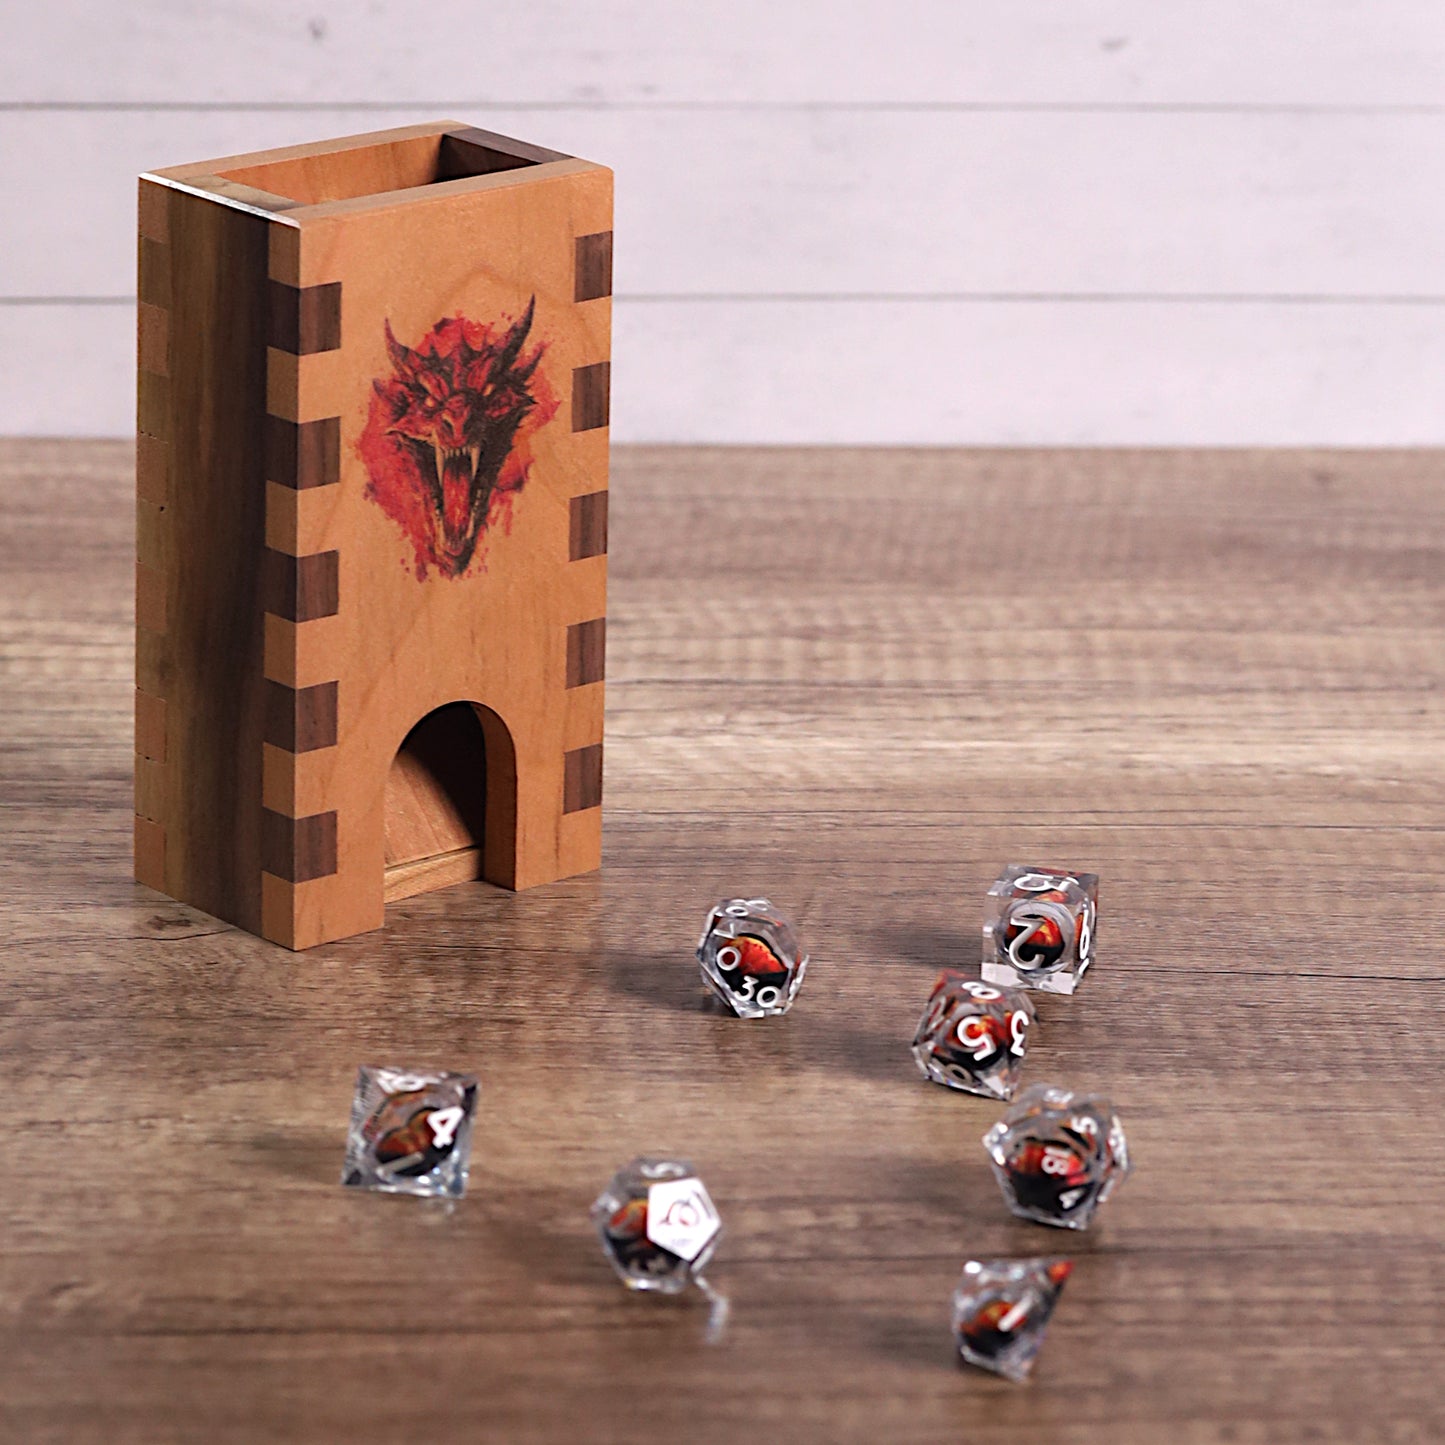 Red Dragon Dice Tower Wood for Role Playing Games, Dungeons and Dragons 5e, Shadowrun, Pathfinder 2e, DnD Dice Roller Wooden, Gamer Dad Gift - Dragon Armor Games